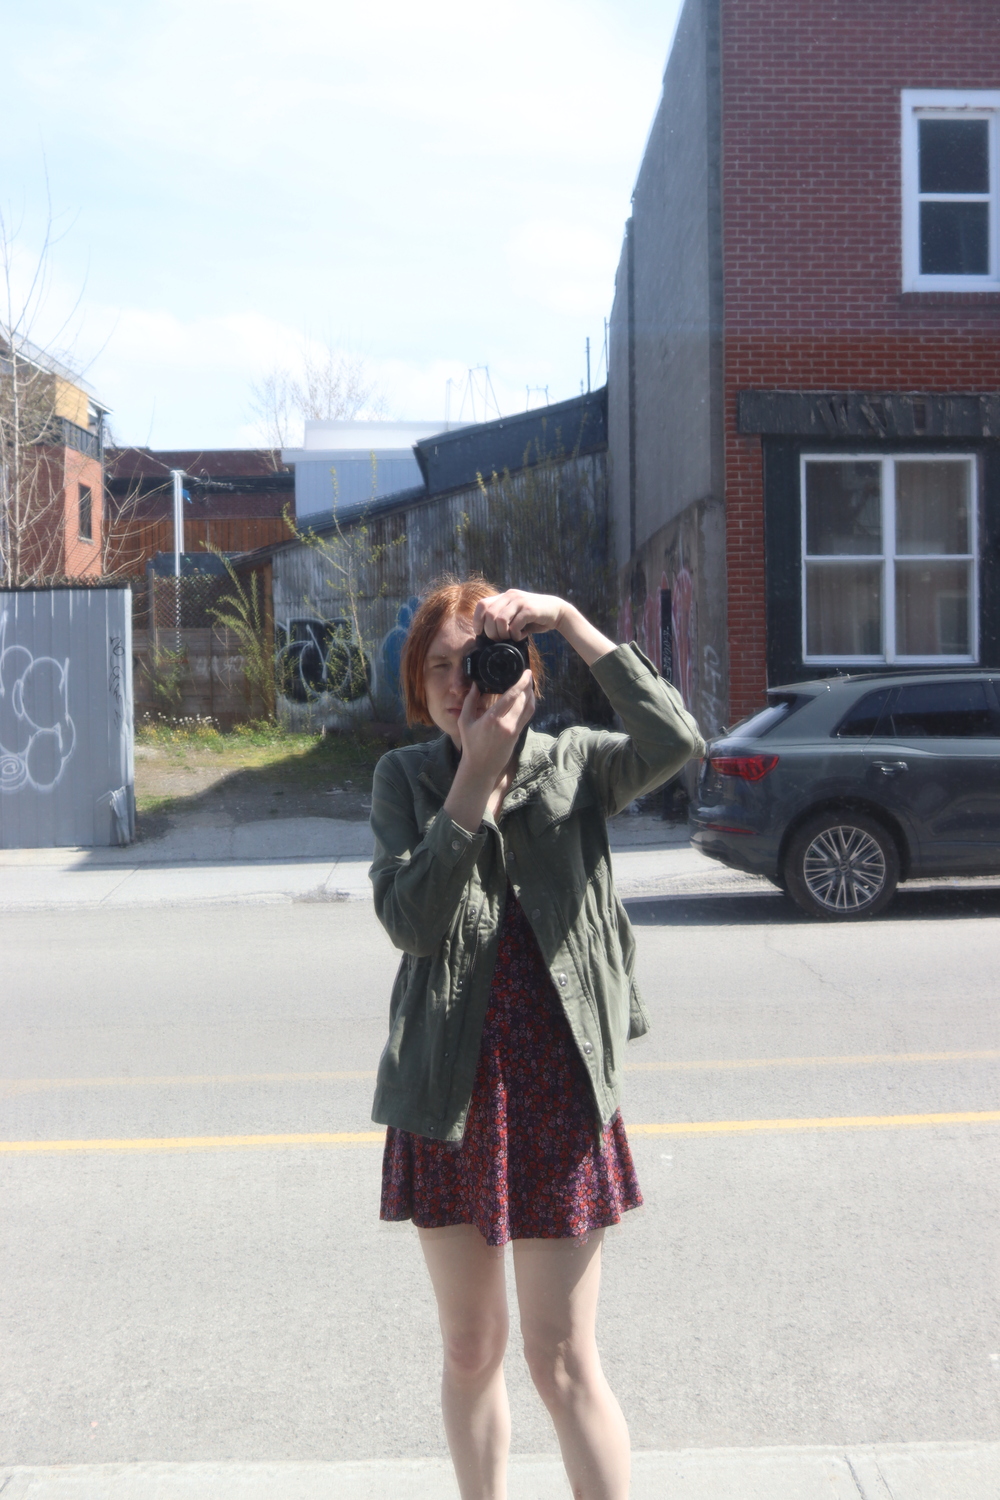 a selfie taken in
a particularly reflective window on the street,
giving everything a slightly offset doubled look
from the layers of glass.
I'm wearing a red and purple floral patterned dress
and a green jacket.
I have red hair
and I'm holding a canon DSLR
up to my face.